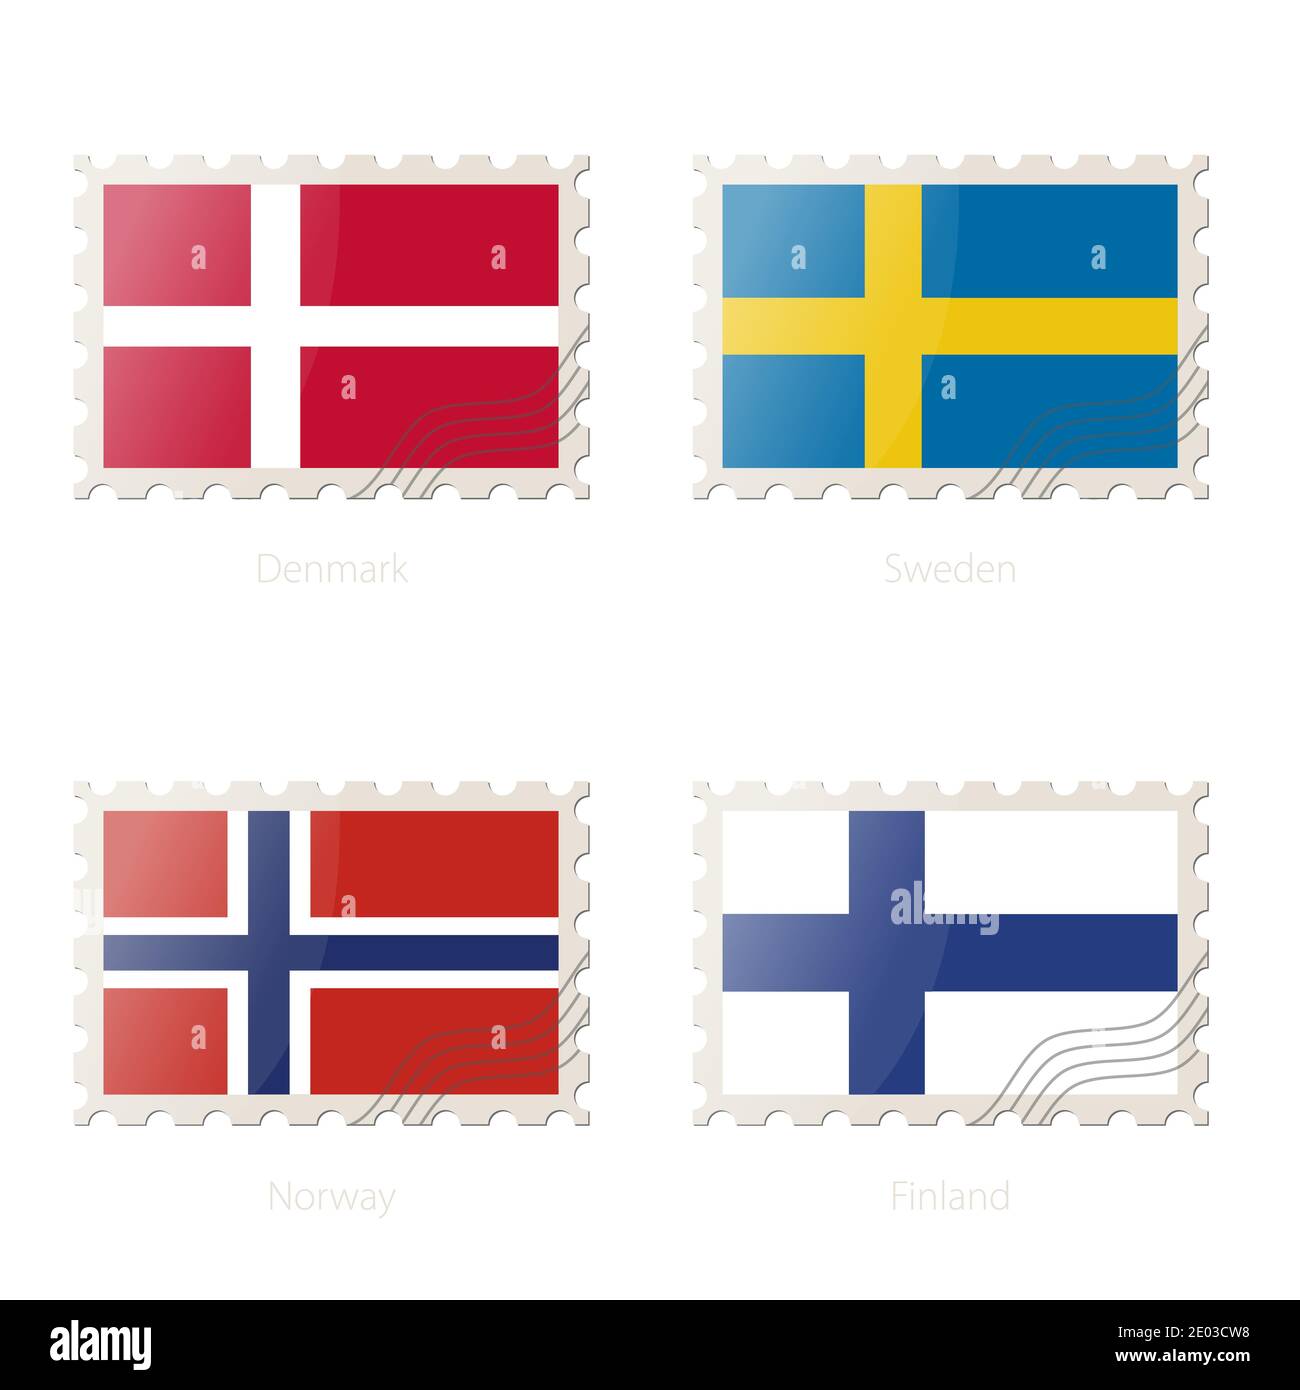 Postage stamp with the image of Denmark, Sweden, Norway, Finland flag. Vector Illustration. Stock Vector